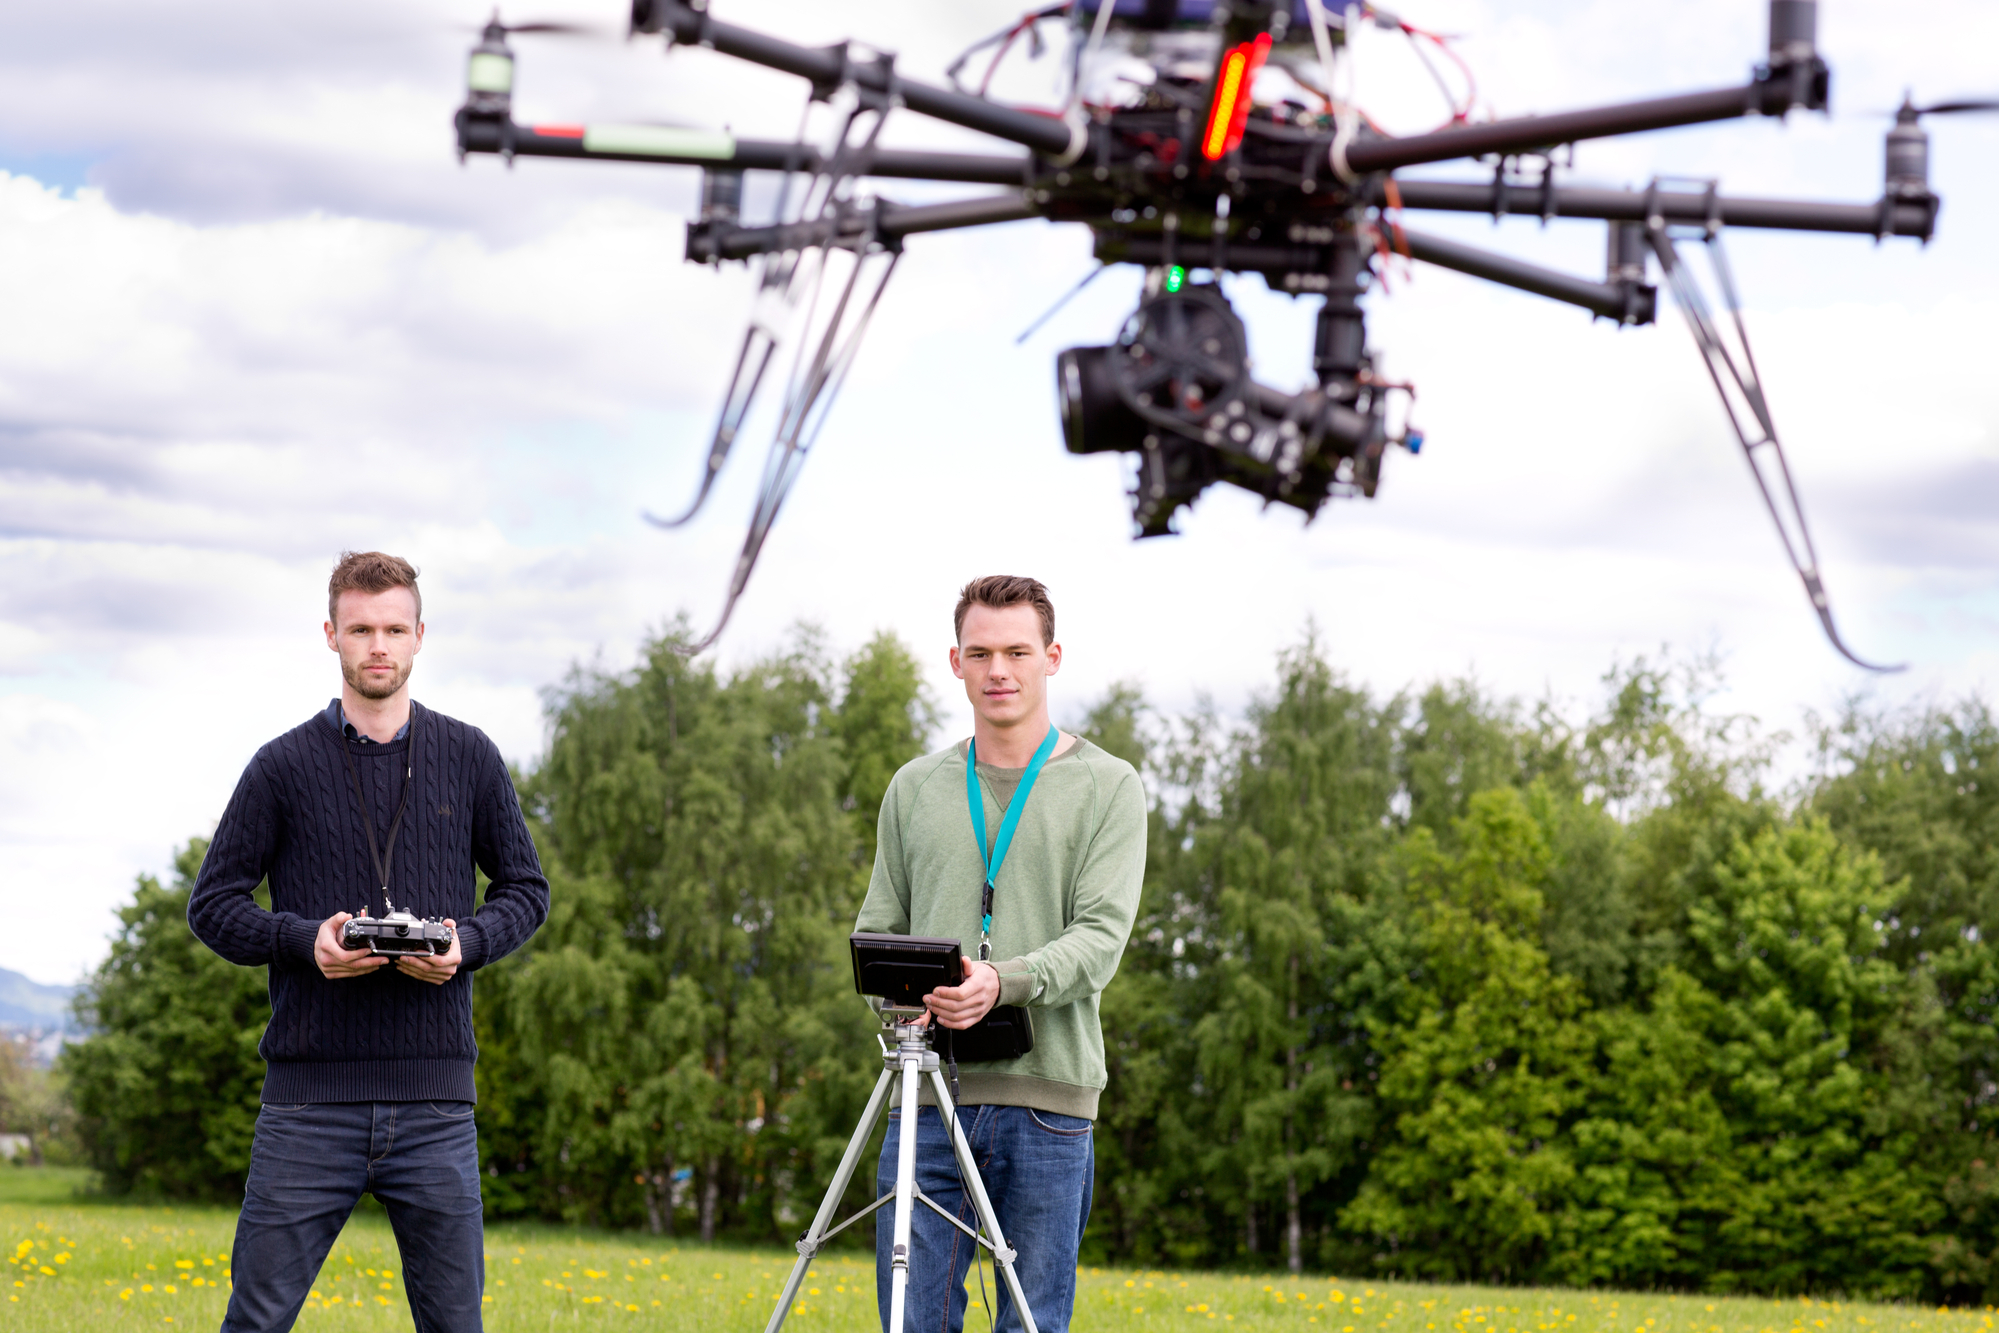 Professional team of a photographer and pilot operating a UAV Photography Drone